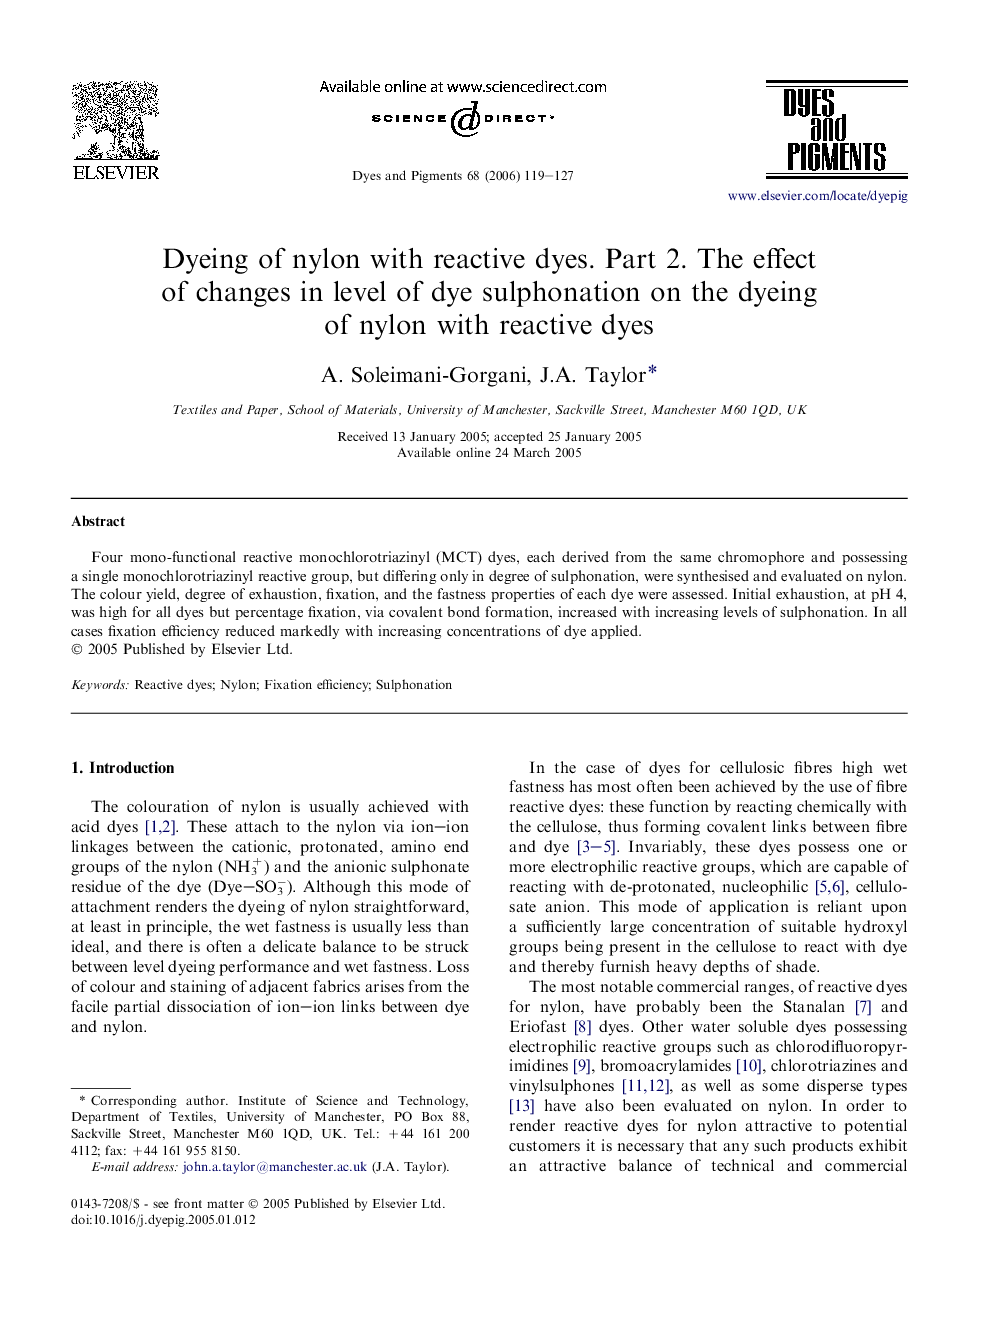 Dyeing of nylon with reactive dyes. Part 2. The effect of changes in level of dye sulphonation on the dyeing of nylon with reactive dyes